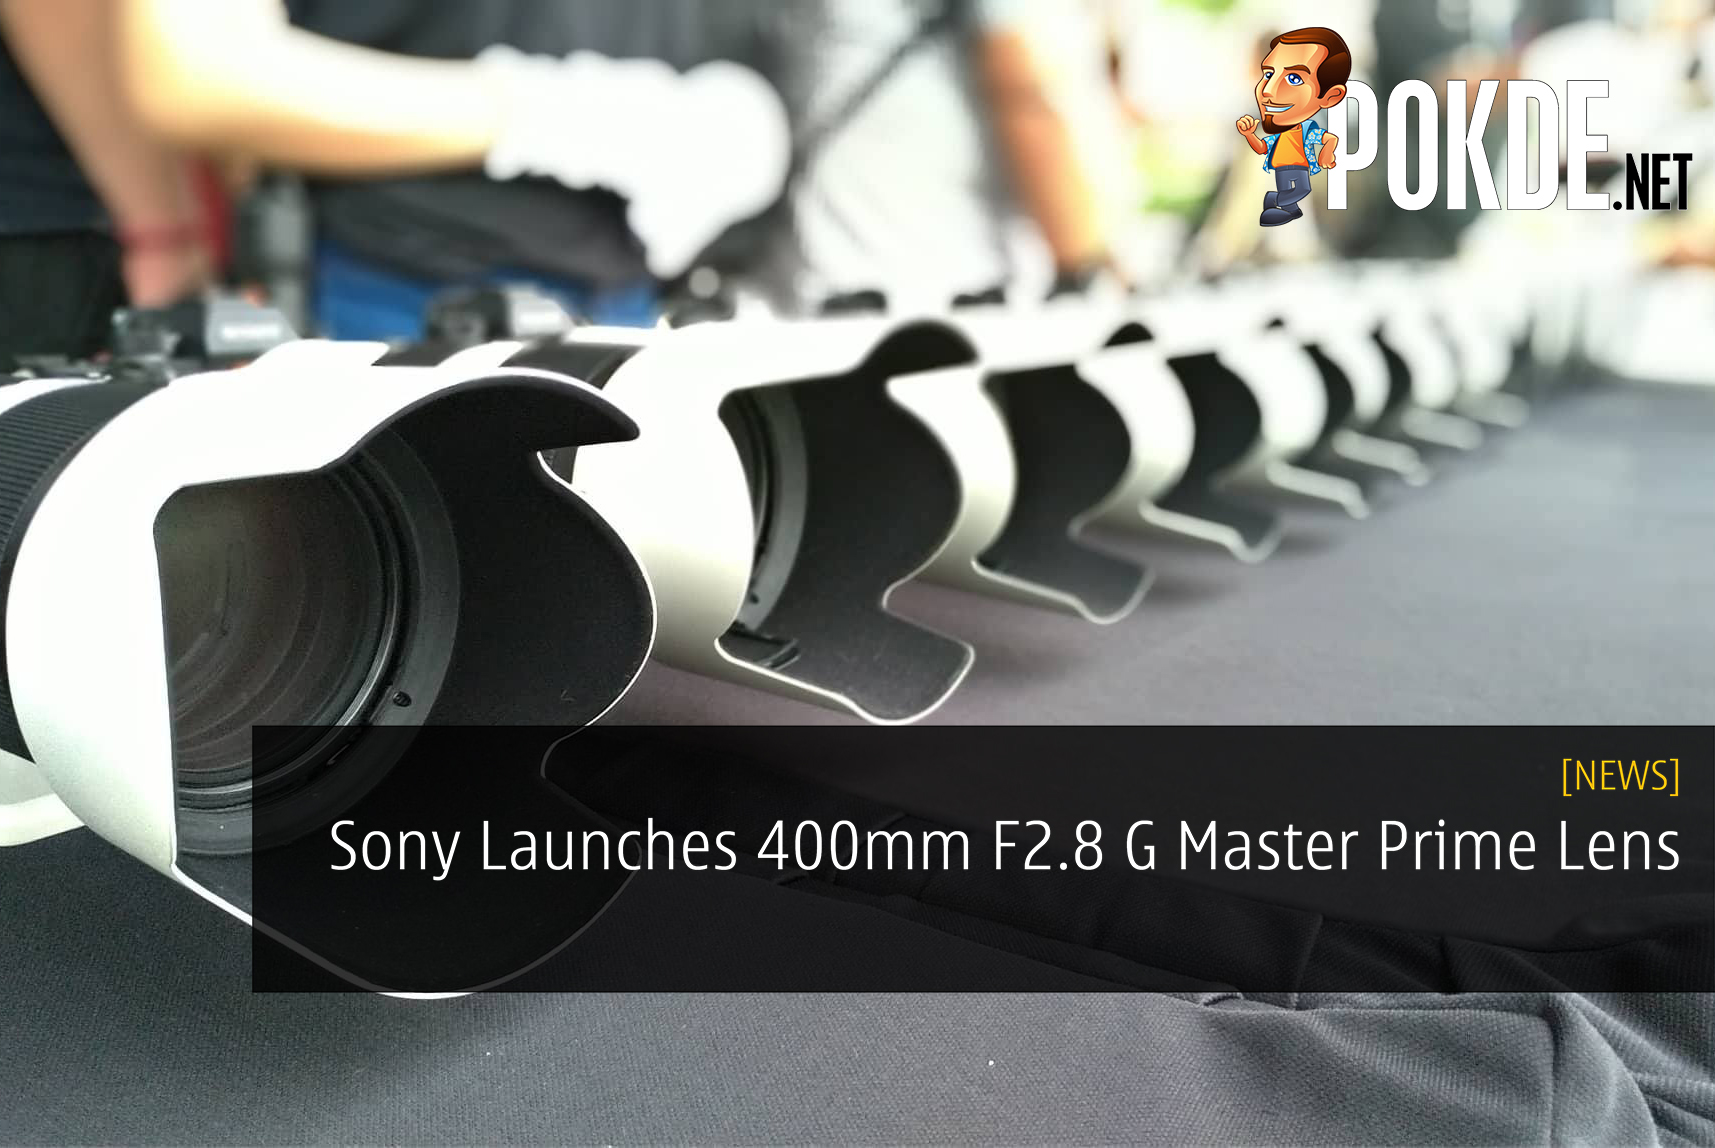 Sony Launches 400mm F2.8 G Master Prime Lens